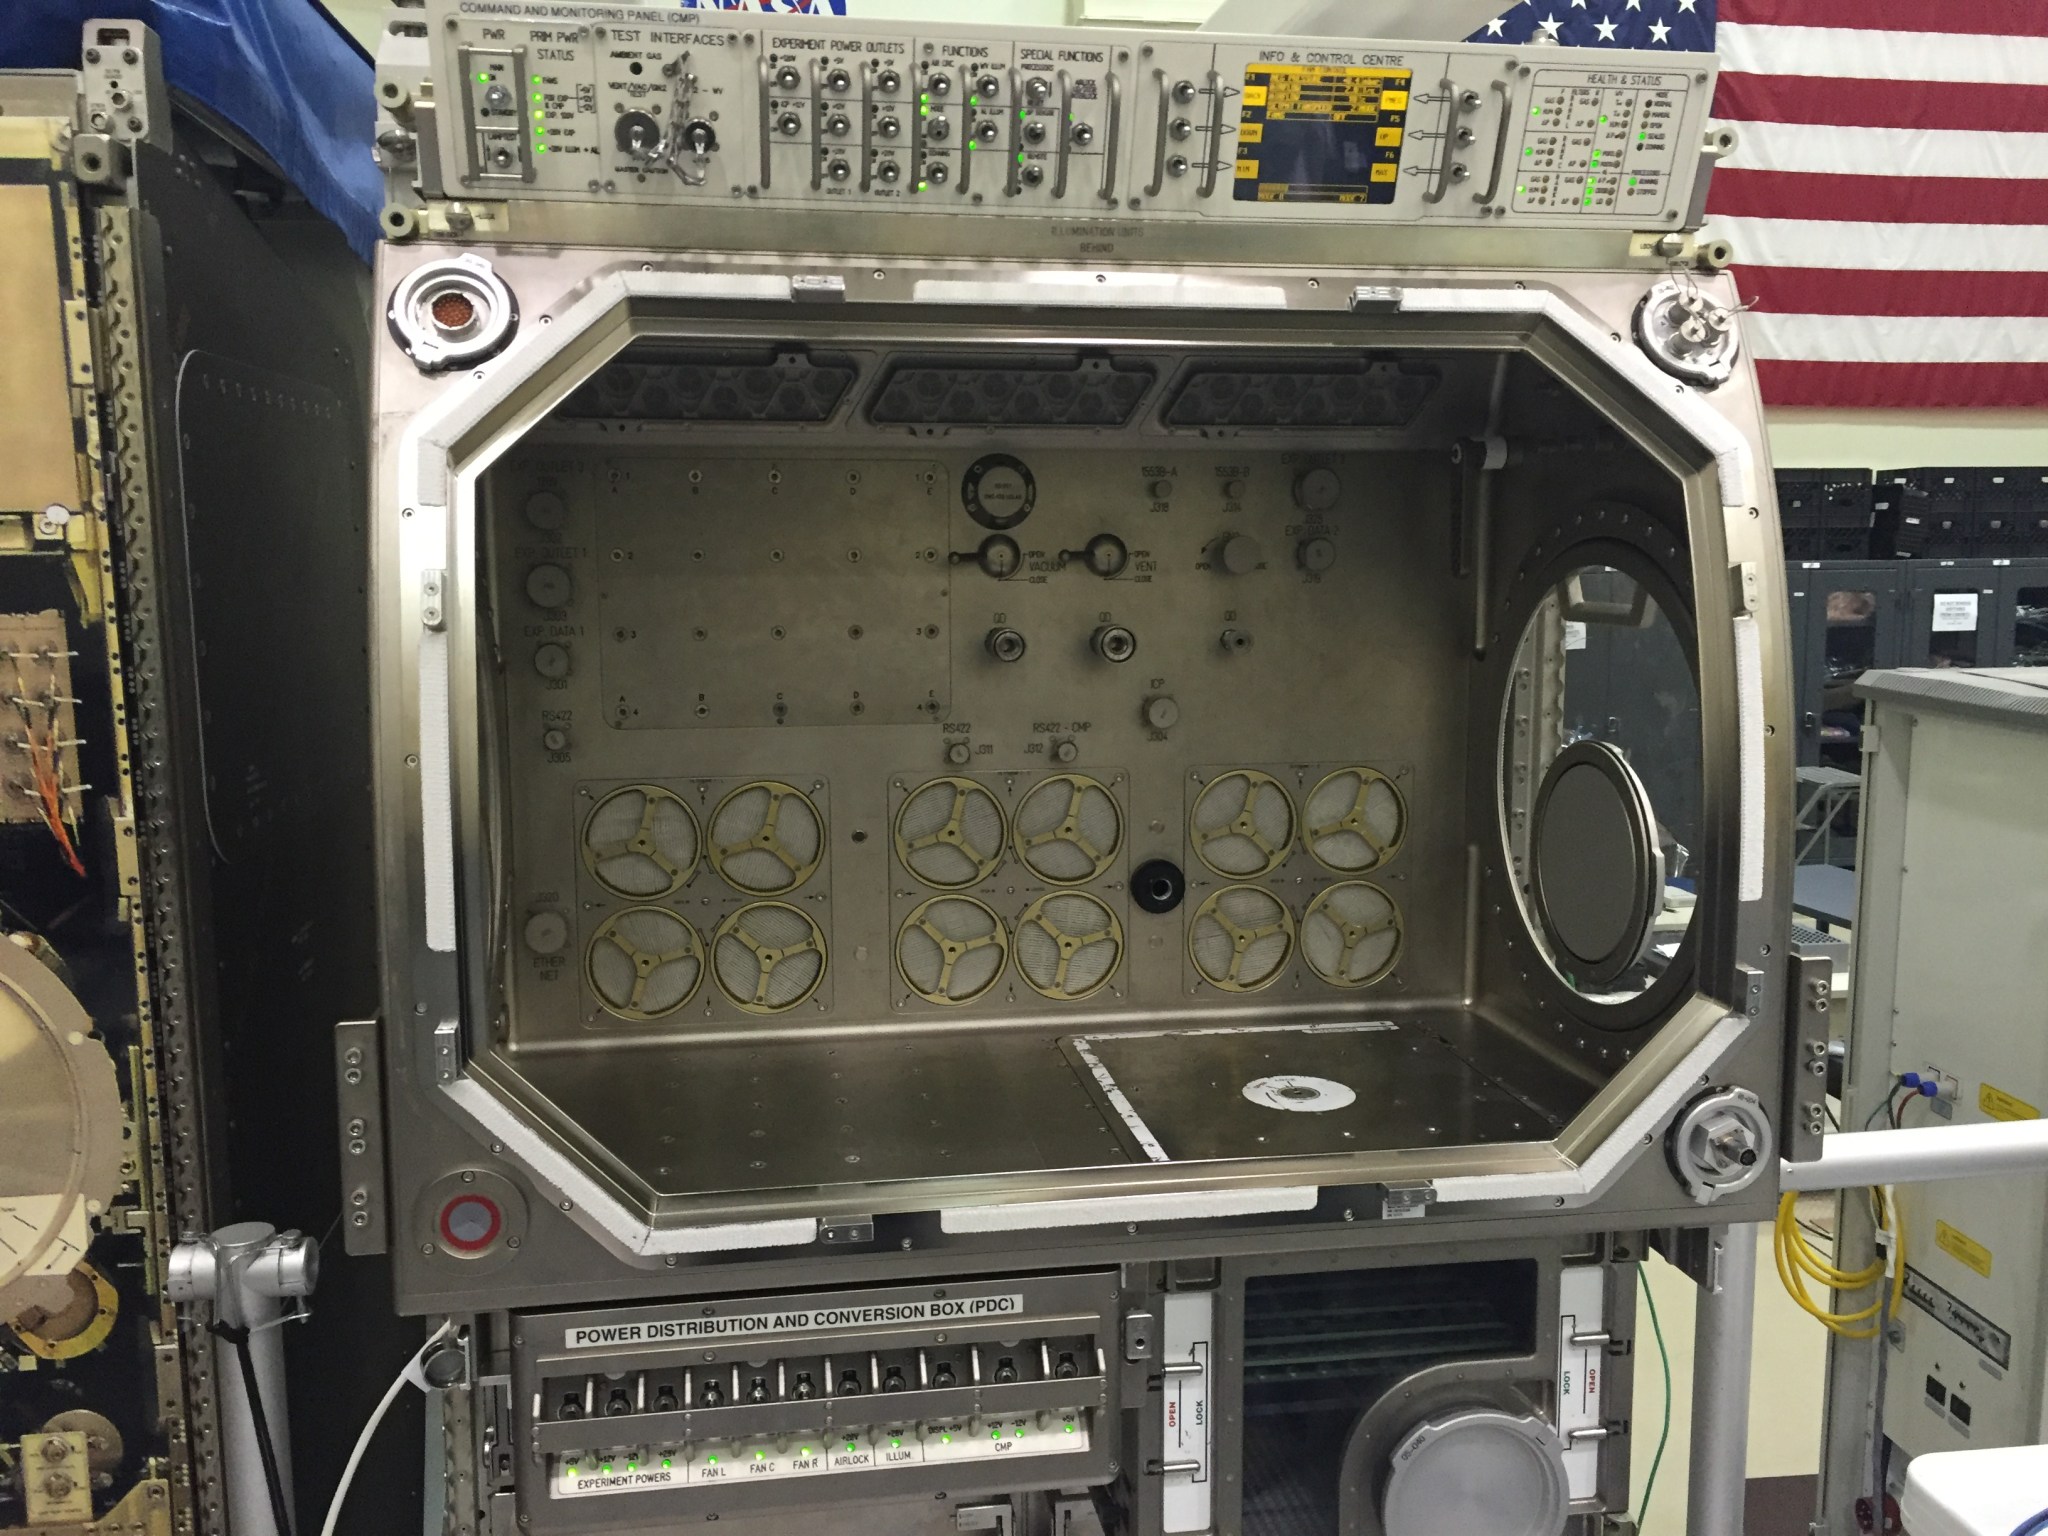 The engineering model of the Microgravity Science Glovebox at NASA's Marshall Space Flight Center